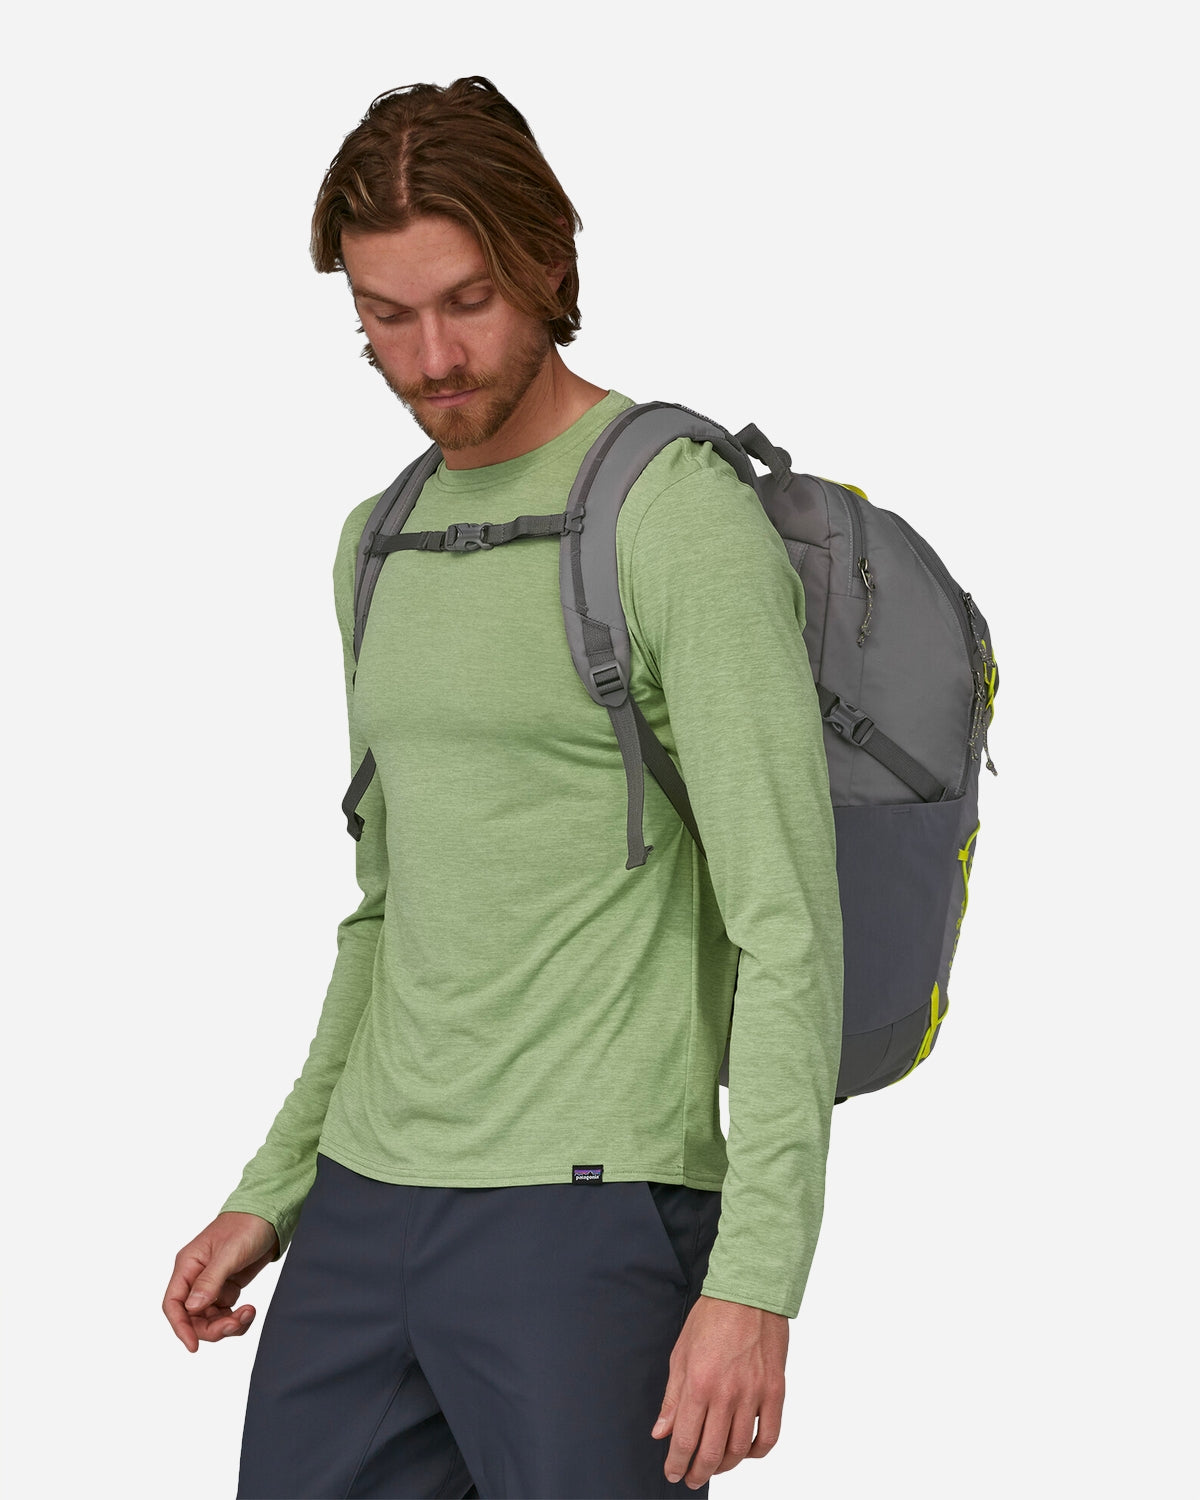 Refugio Day Pack 30L - Forge Grey